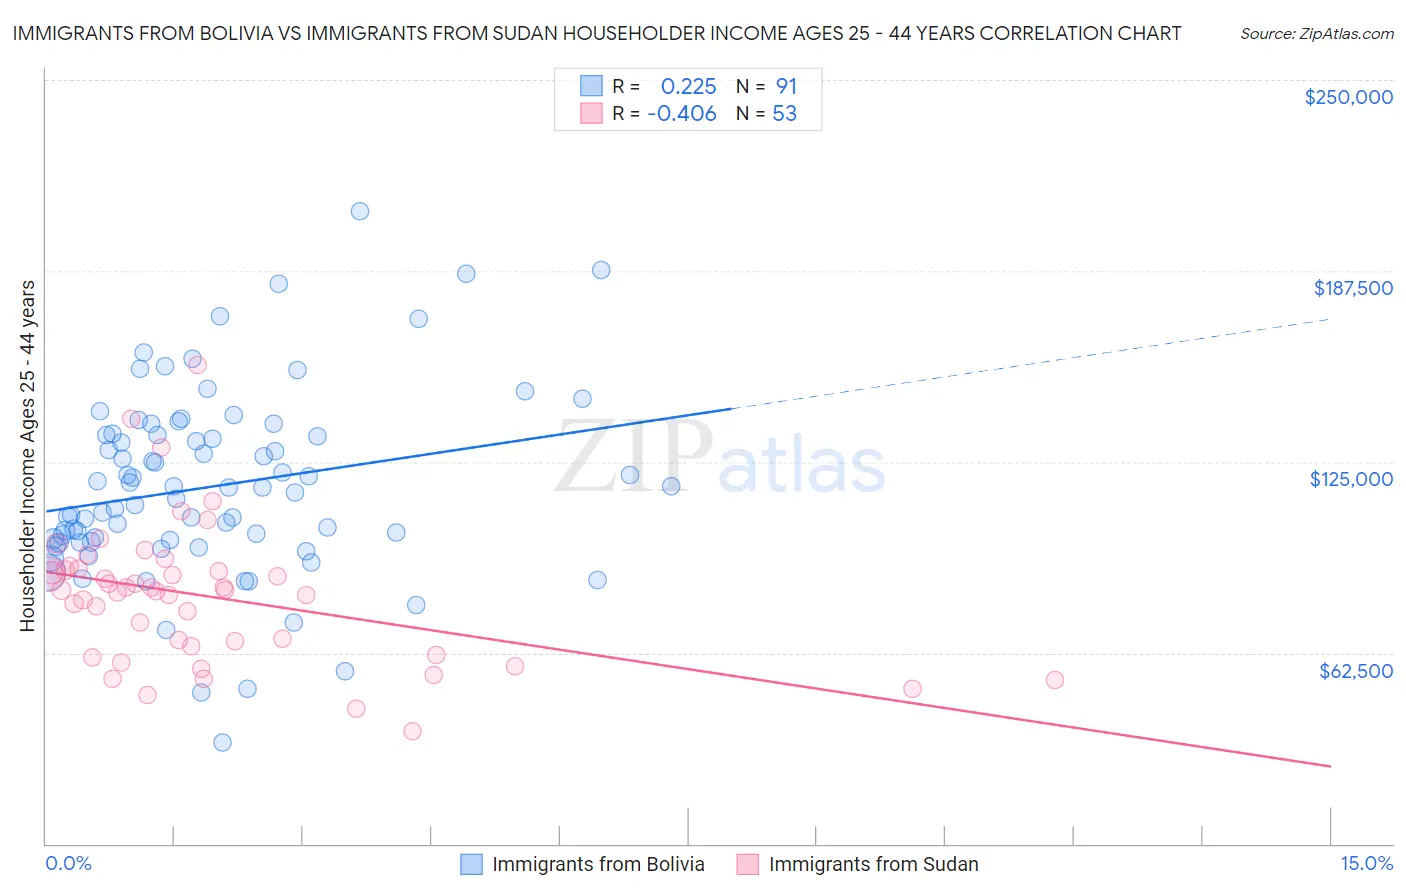 Immigrants from Bolivia vs Immigrants from Sudan Householder Income Ages 25 - 44 years